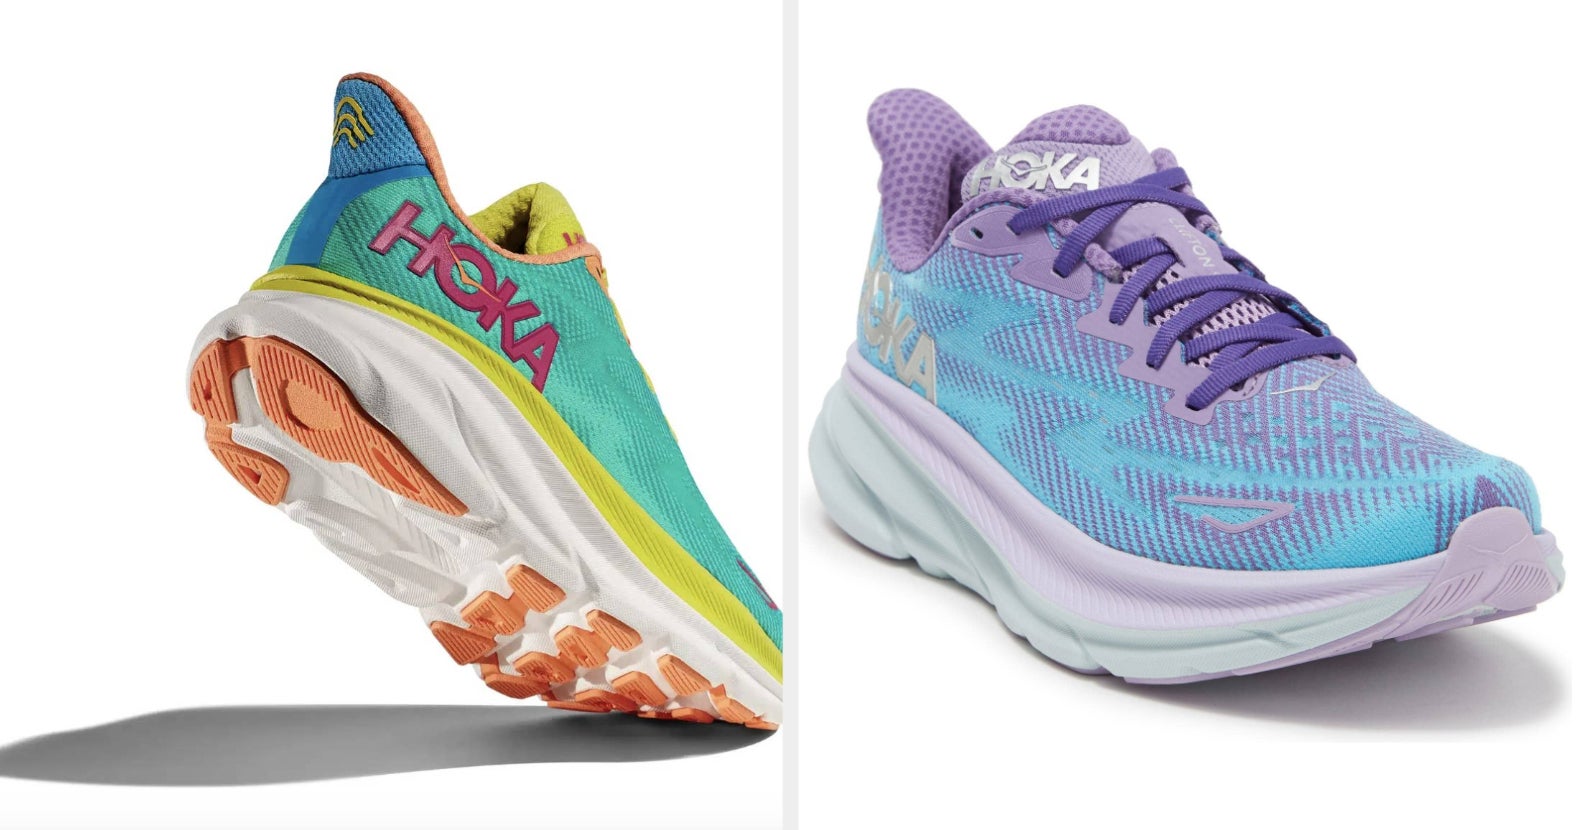 Hoka Sneakers Review: Why I Regret Doubting The Hype